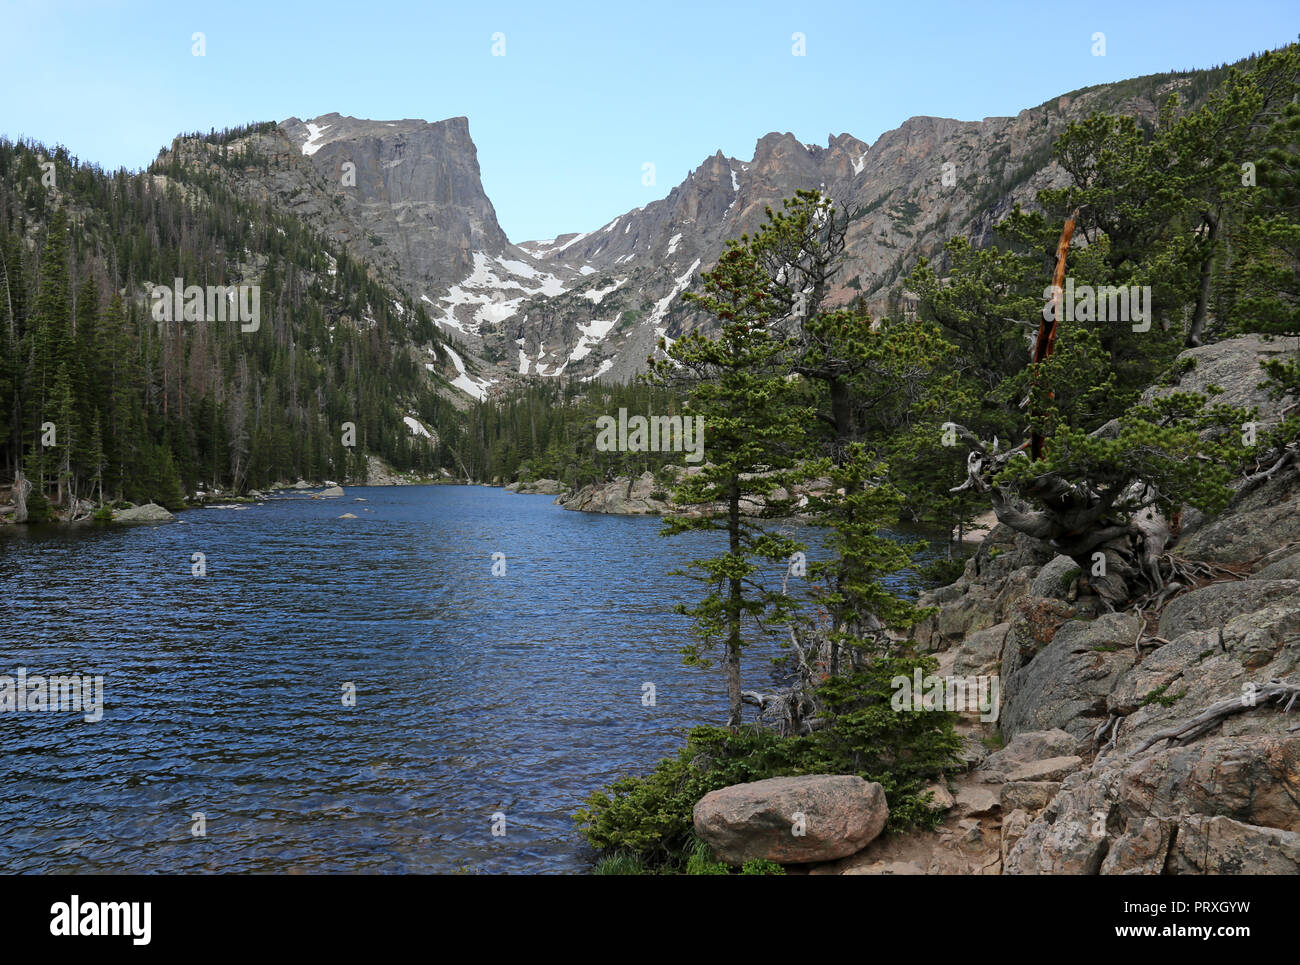 Dream lake with the Hallett Peak on the horizon, shot on trail to Emerald Lake in Rocky Mountain National Park, Colorado. Stock Photo